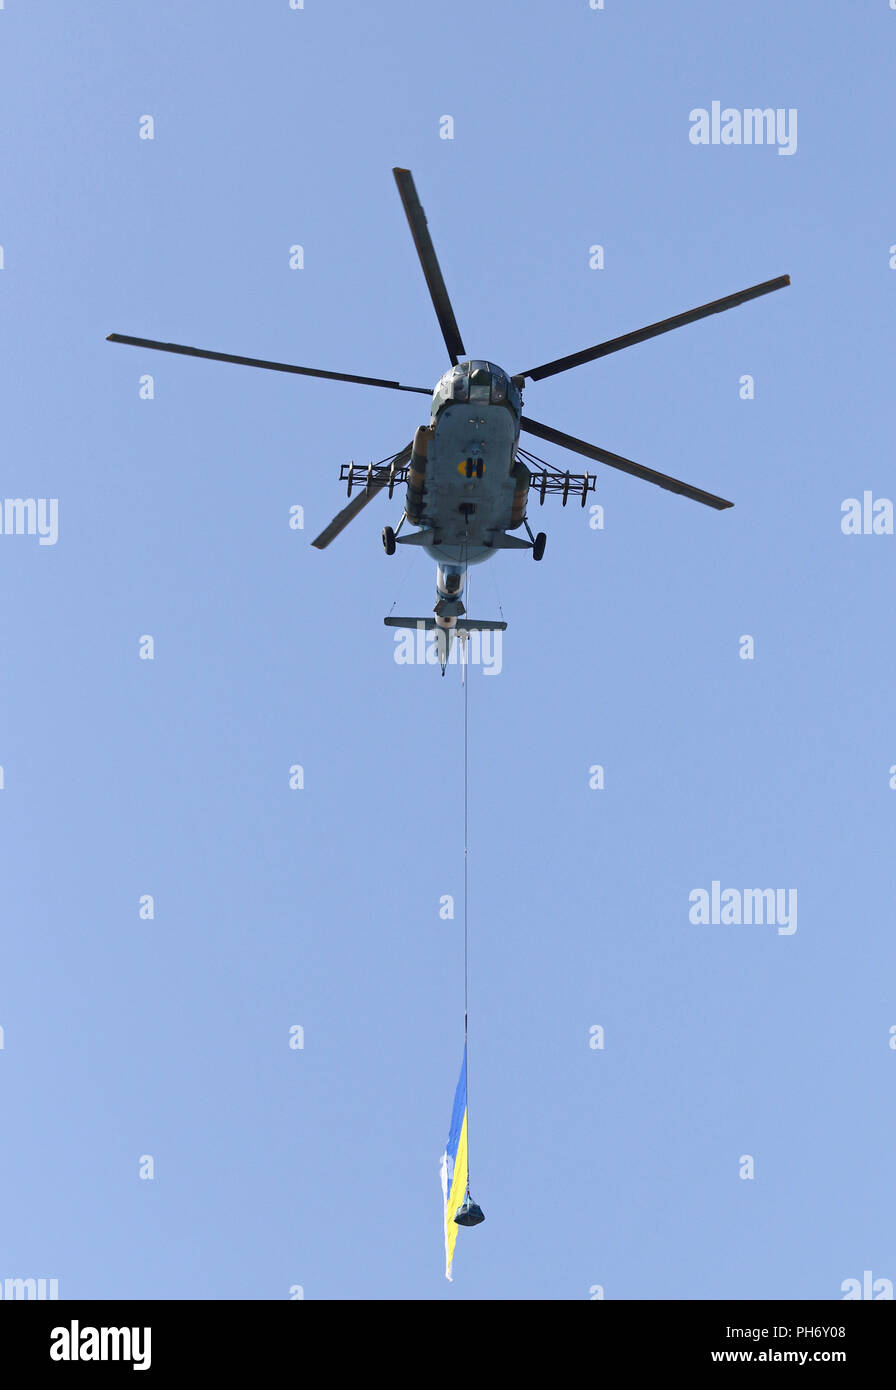 KYIV, UKRAINE - AUGUST 24, 2018: Ukrainian military helicopters fly over the Independence Square in Kyiv during the military parade, dedicated to the  Stock Photo